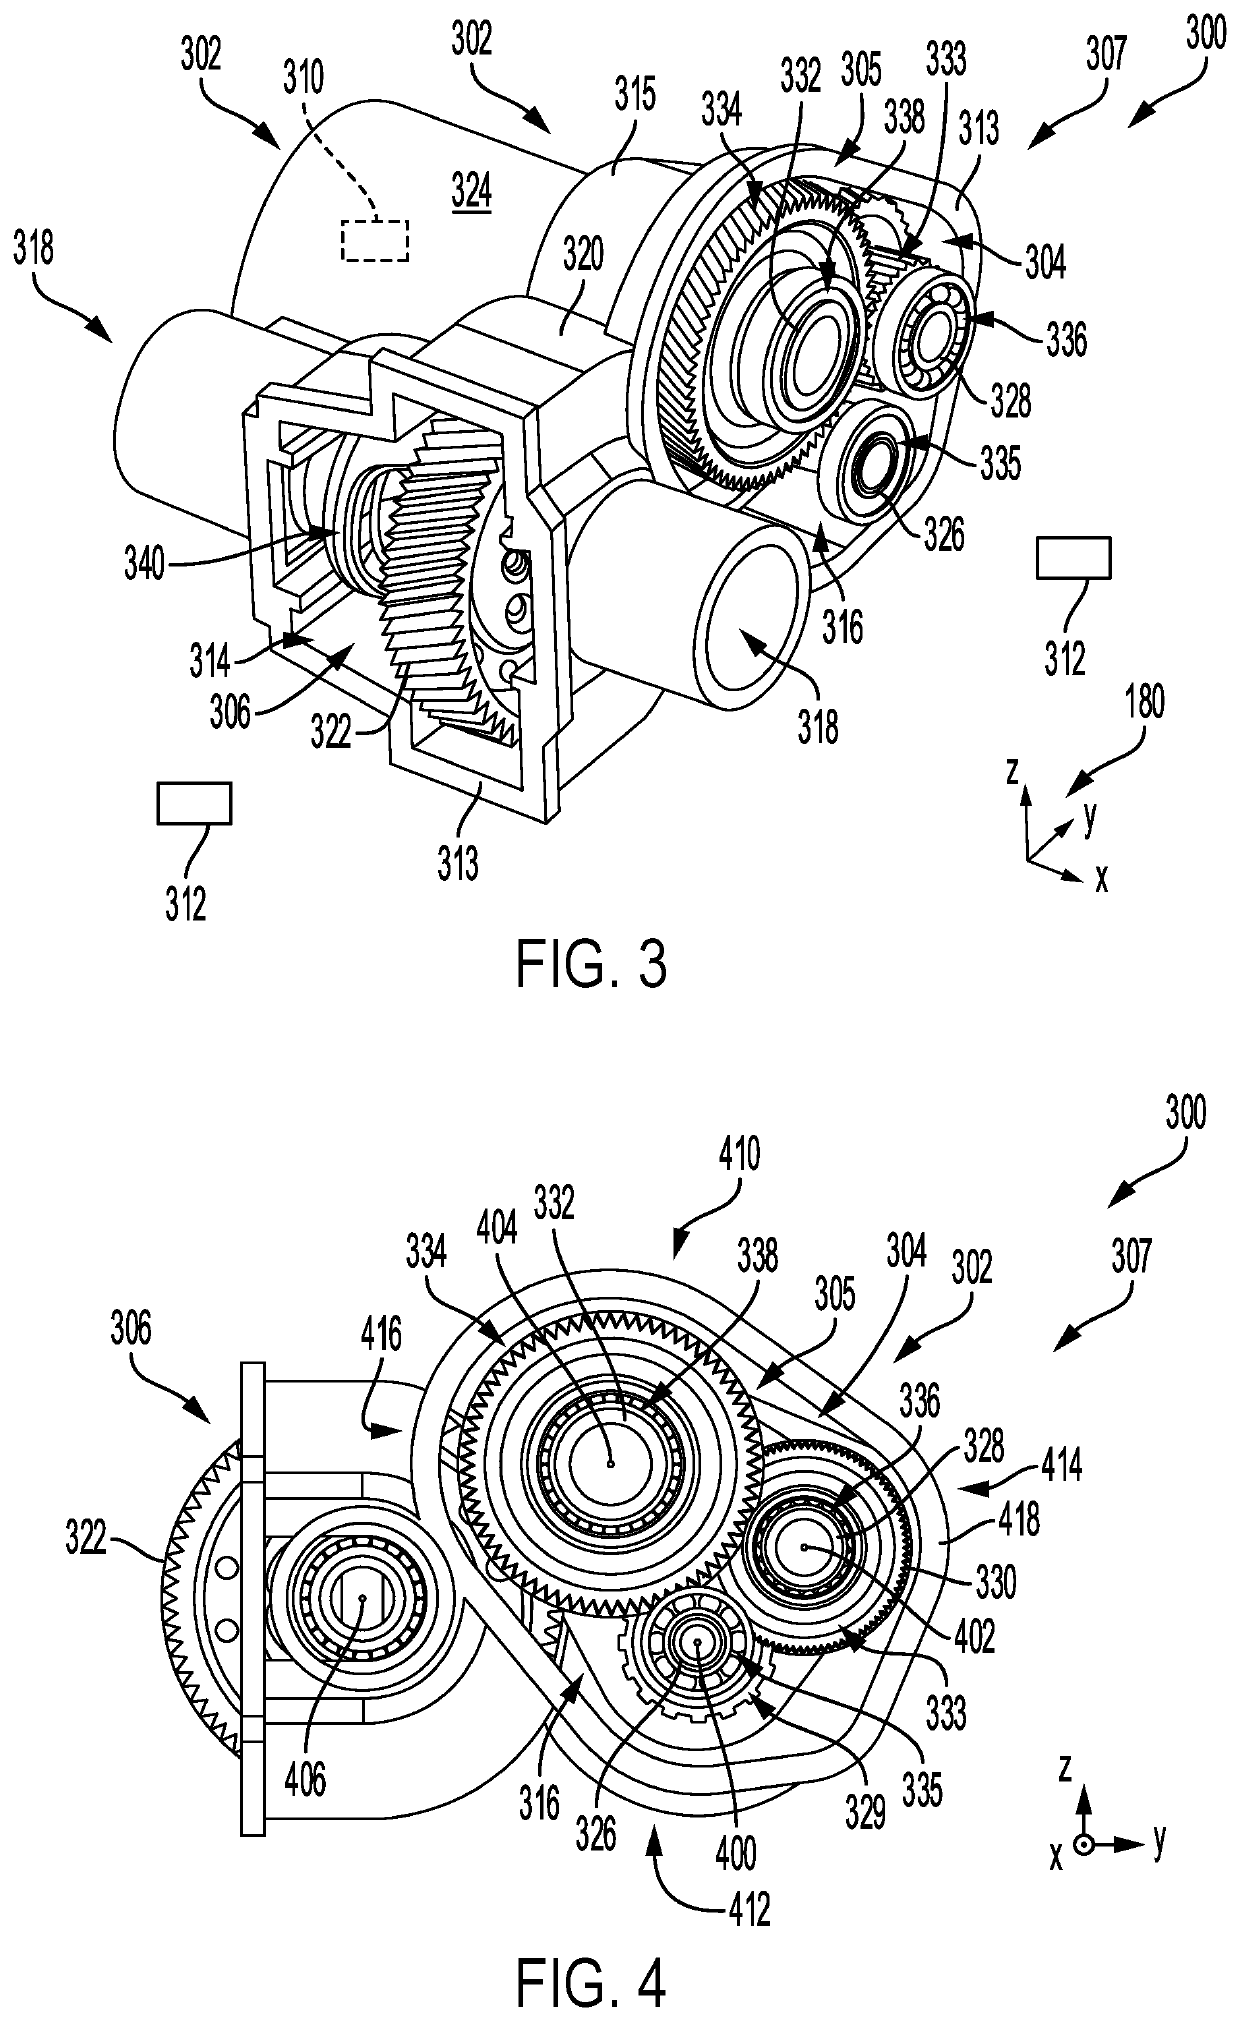 Vehicle product line with multiple gear train assemblies